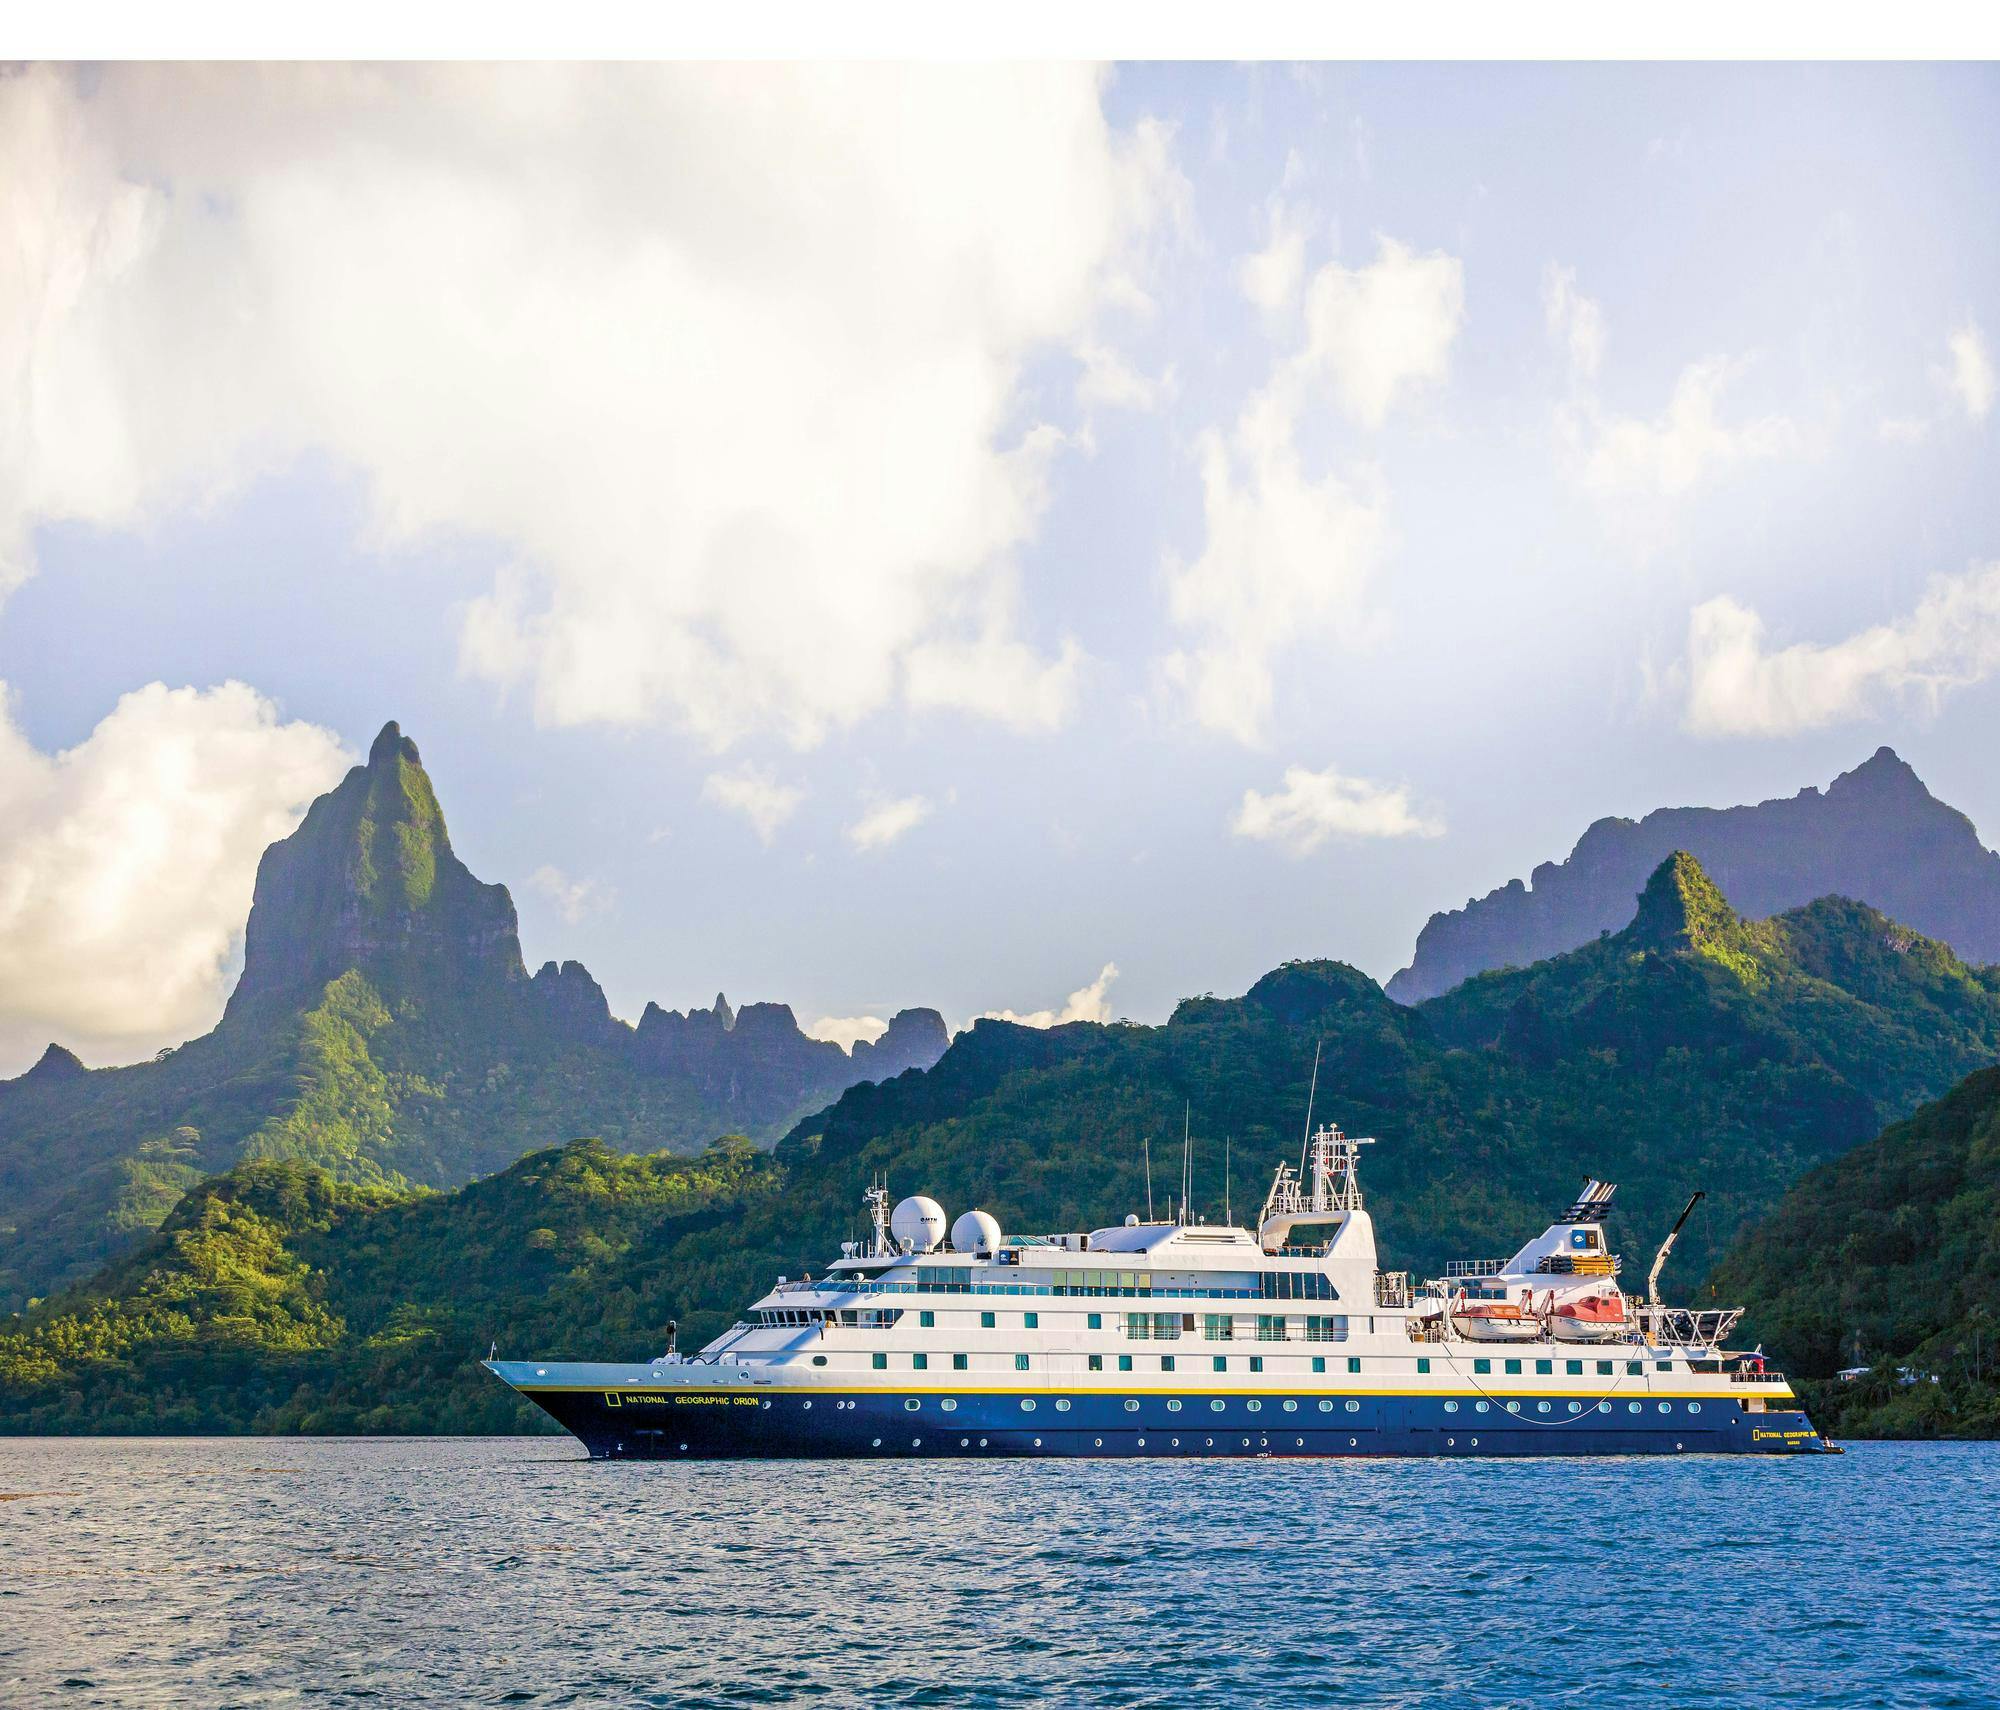 Ship National Geographic Orion in Opunohu Bay at the island of Mo'orea, French Polynesia.